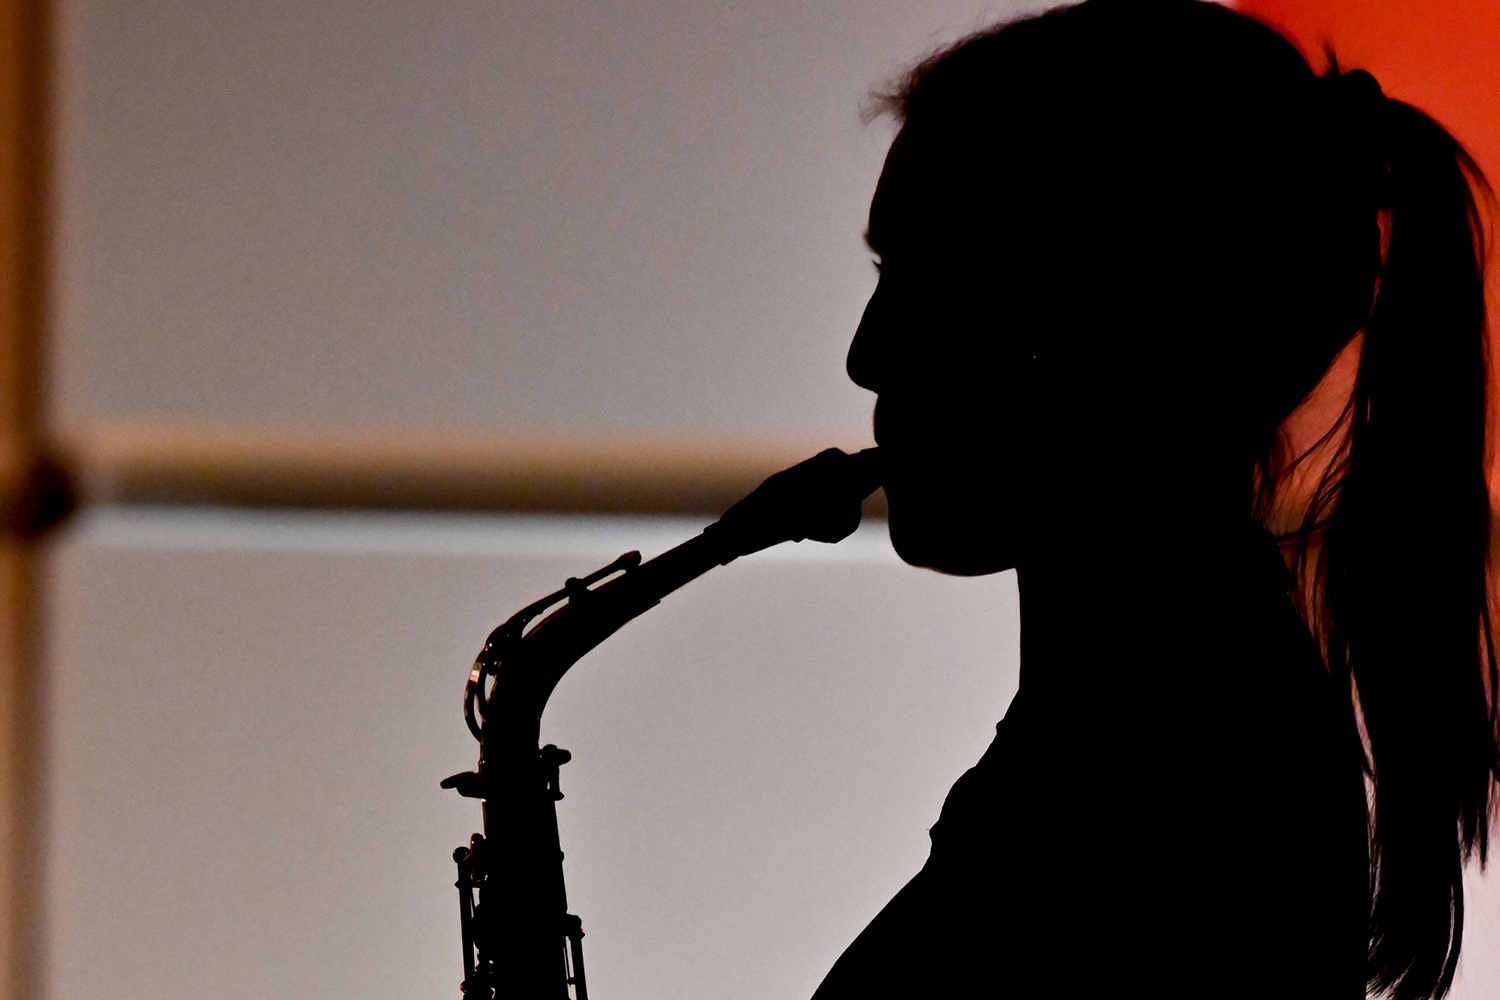 A silhouette of a woman performing on a saxophone